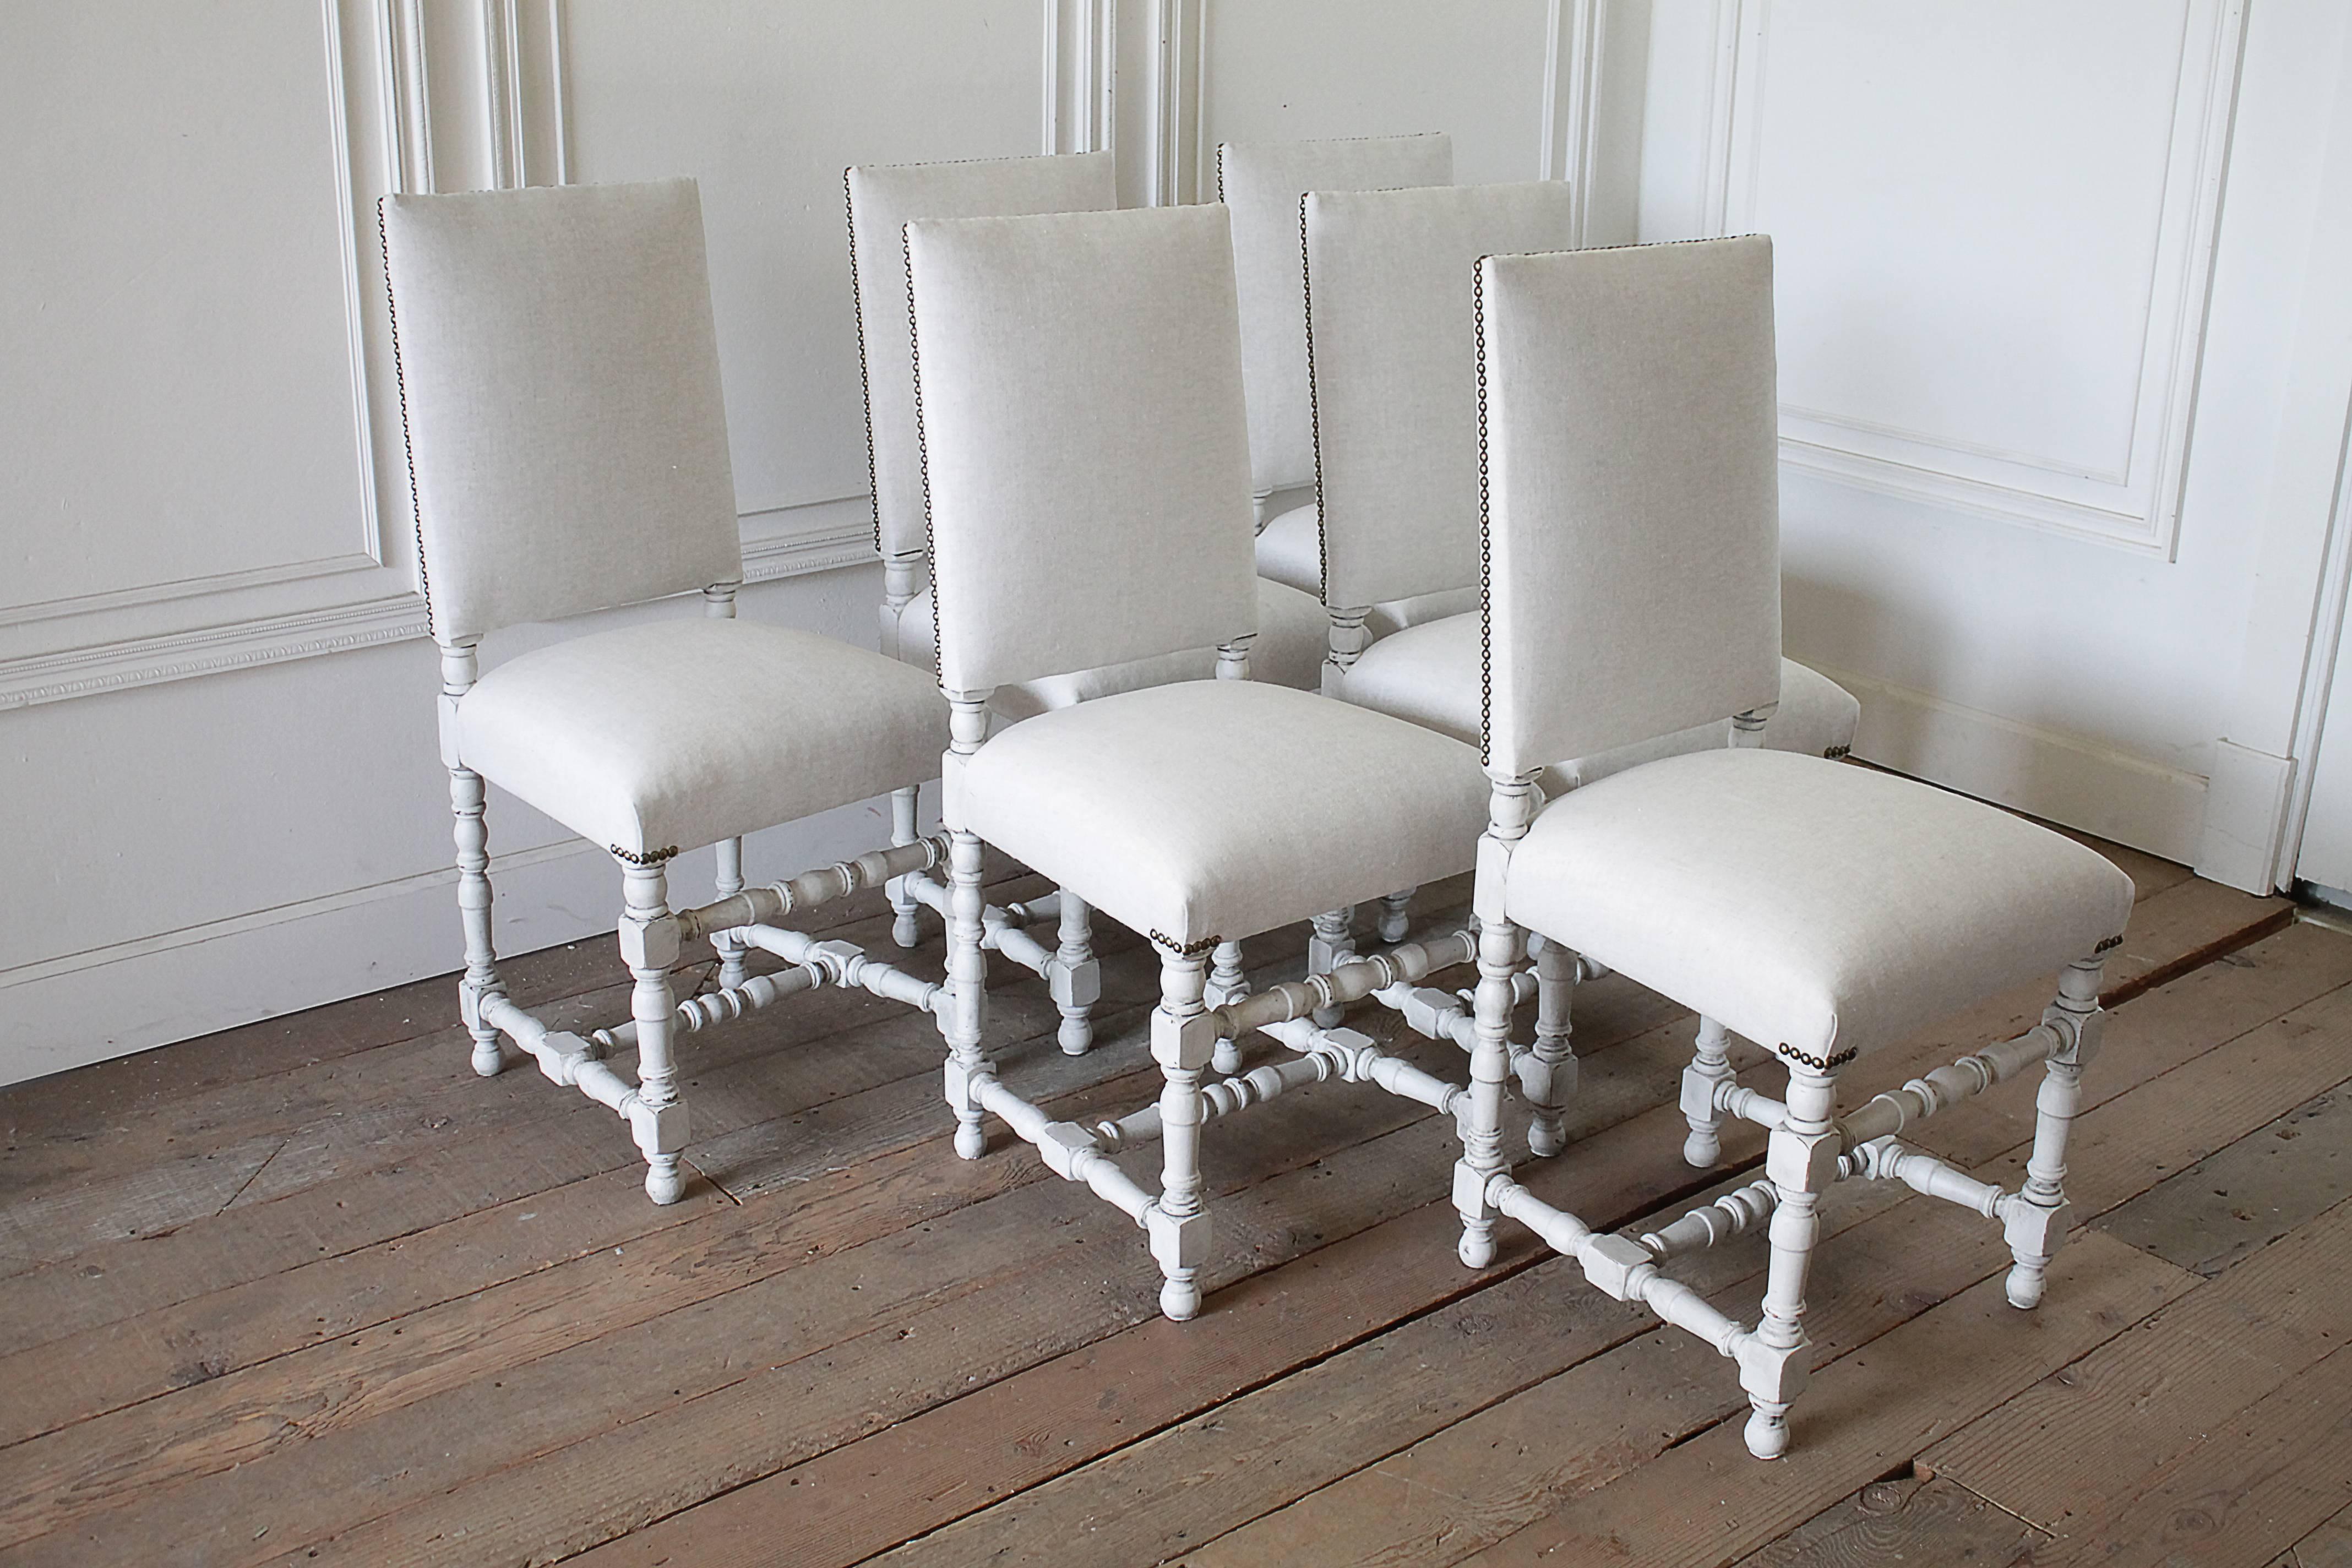 Set of 6 French Style Painted and Upholstered Dining Chairs
Finished in an off white with subtle distressed edges on the legs, and upholstered in a heavy Belgian linen, in a natural flax.  Each chair is solid and sturdy ready for everyday use.  The